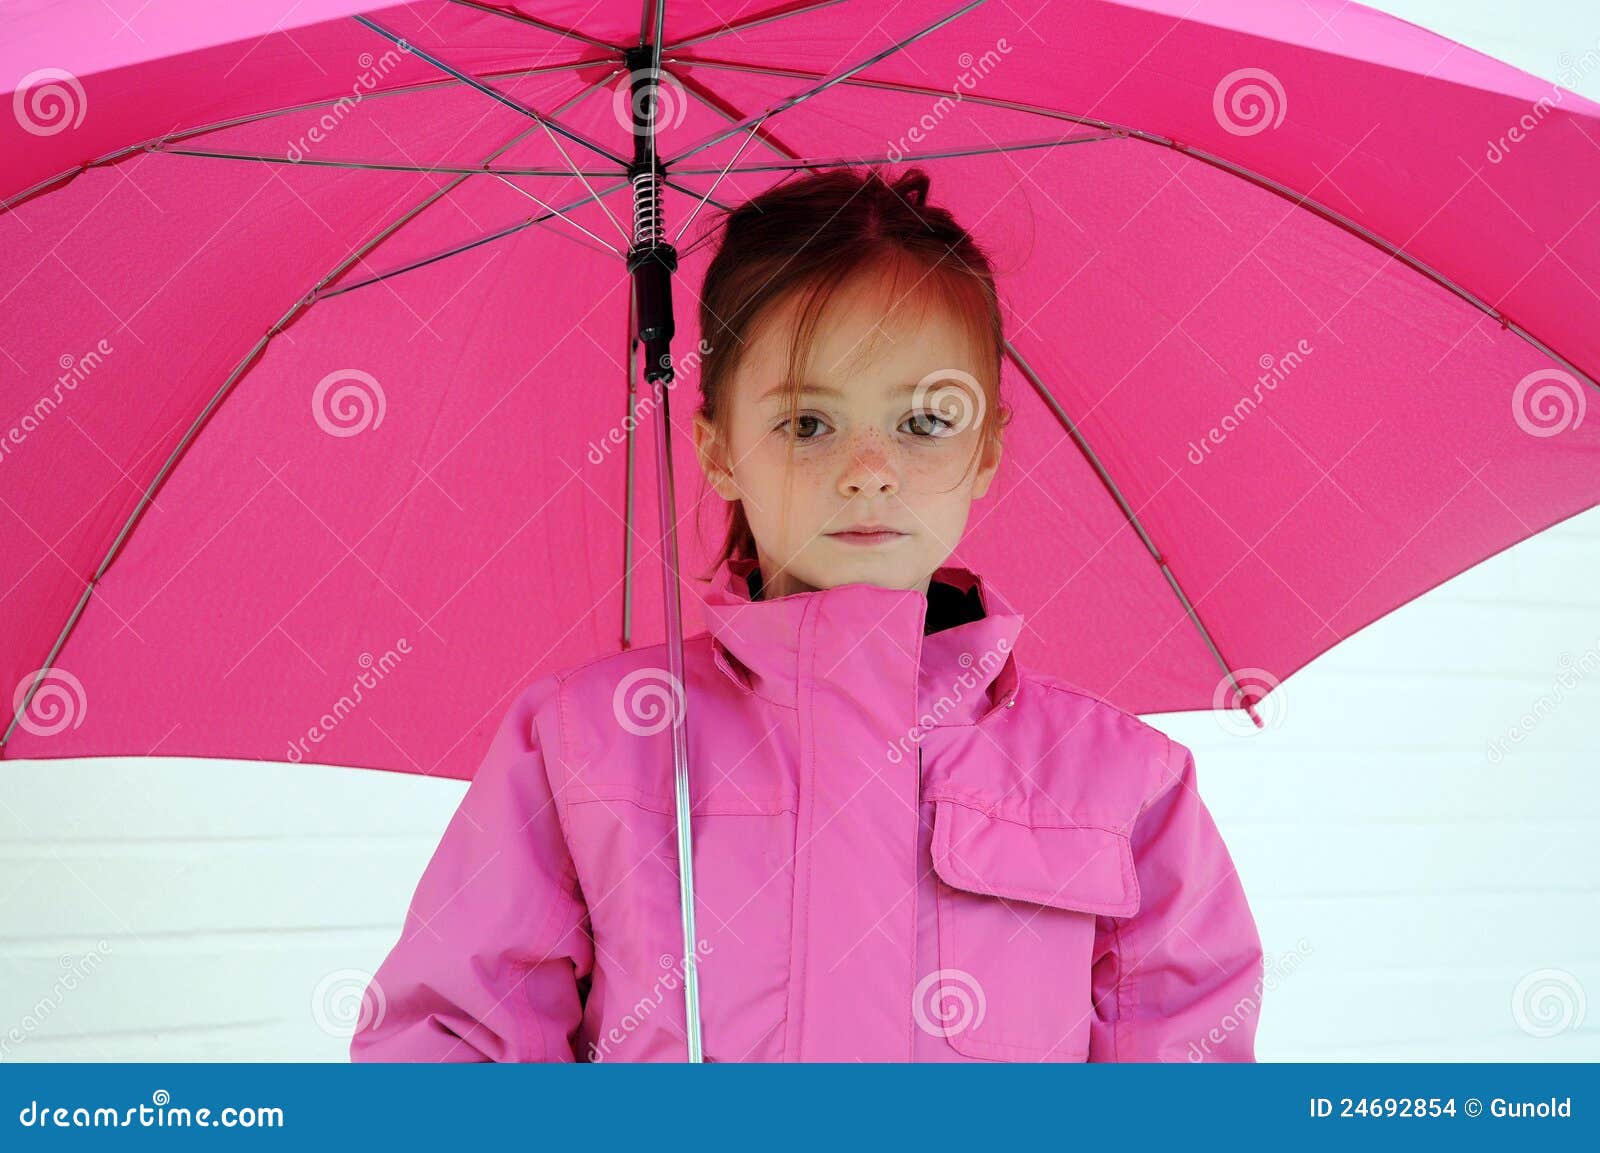 Girl With Pink Umbrella Stock Images - Image: 24692854